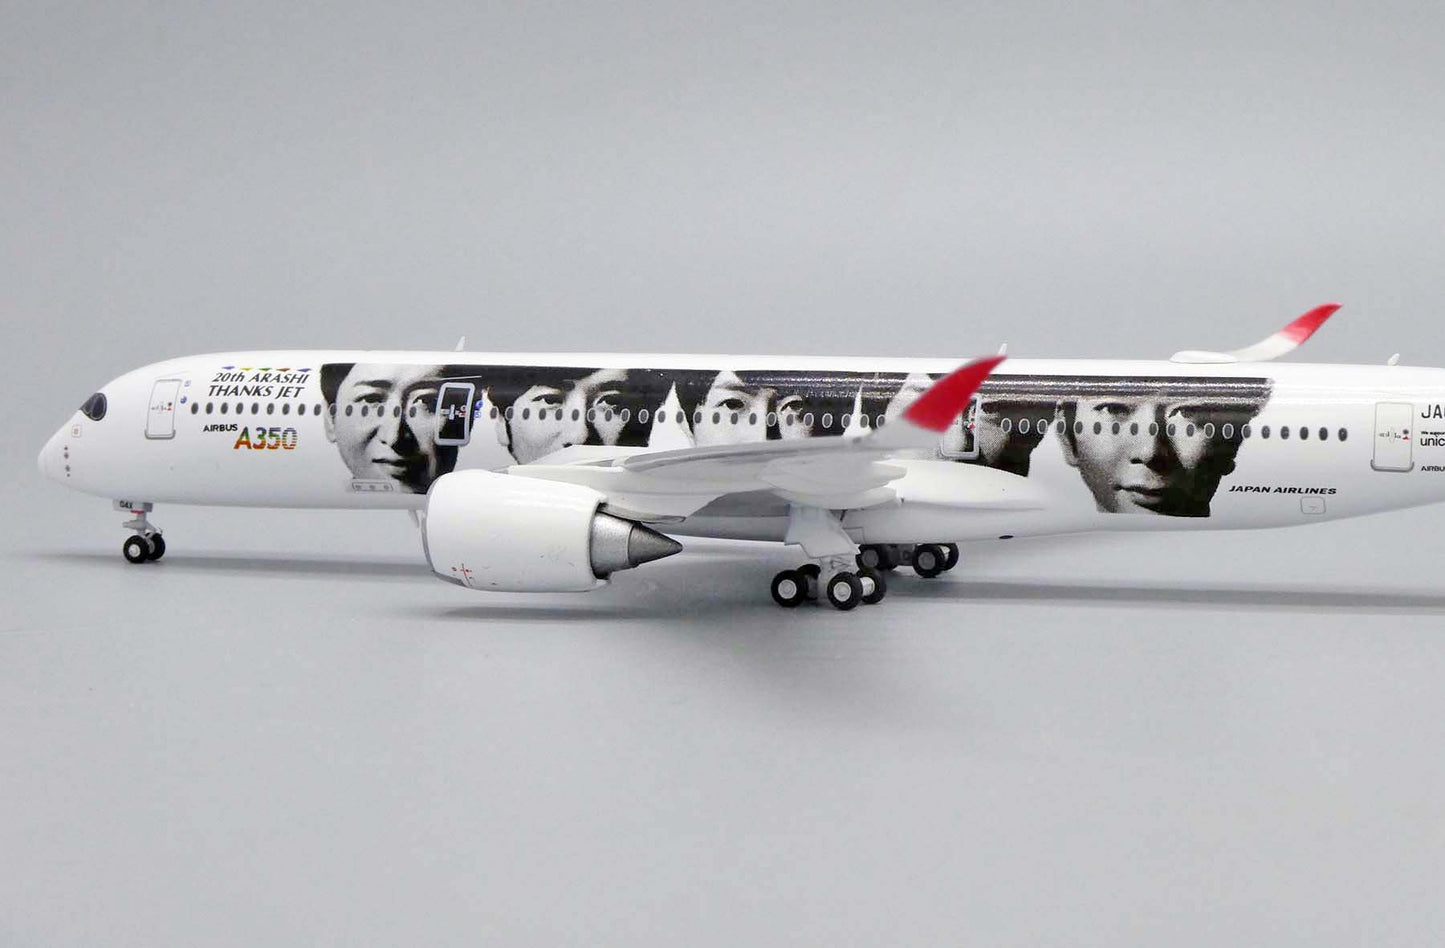 1:400 JC Wings Japan Airlines Airbus A350-900XWB "Special Livery" JA04XJ EW4359005